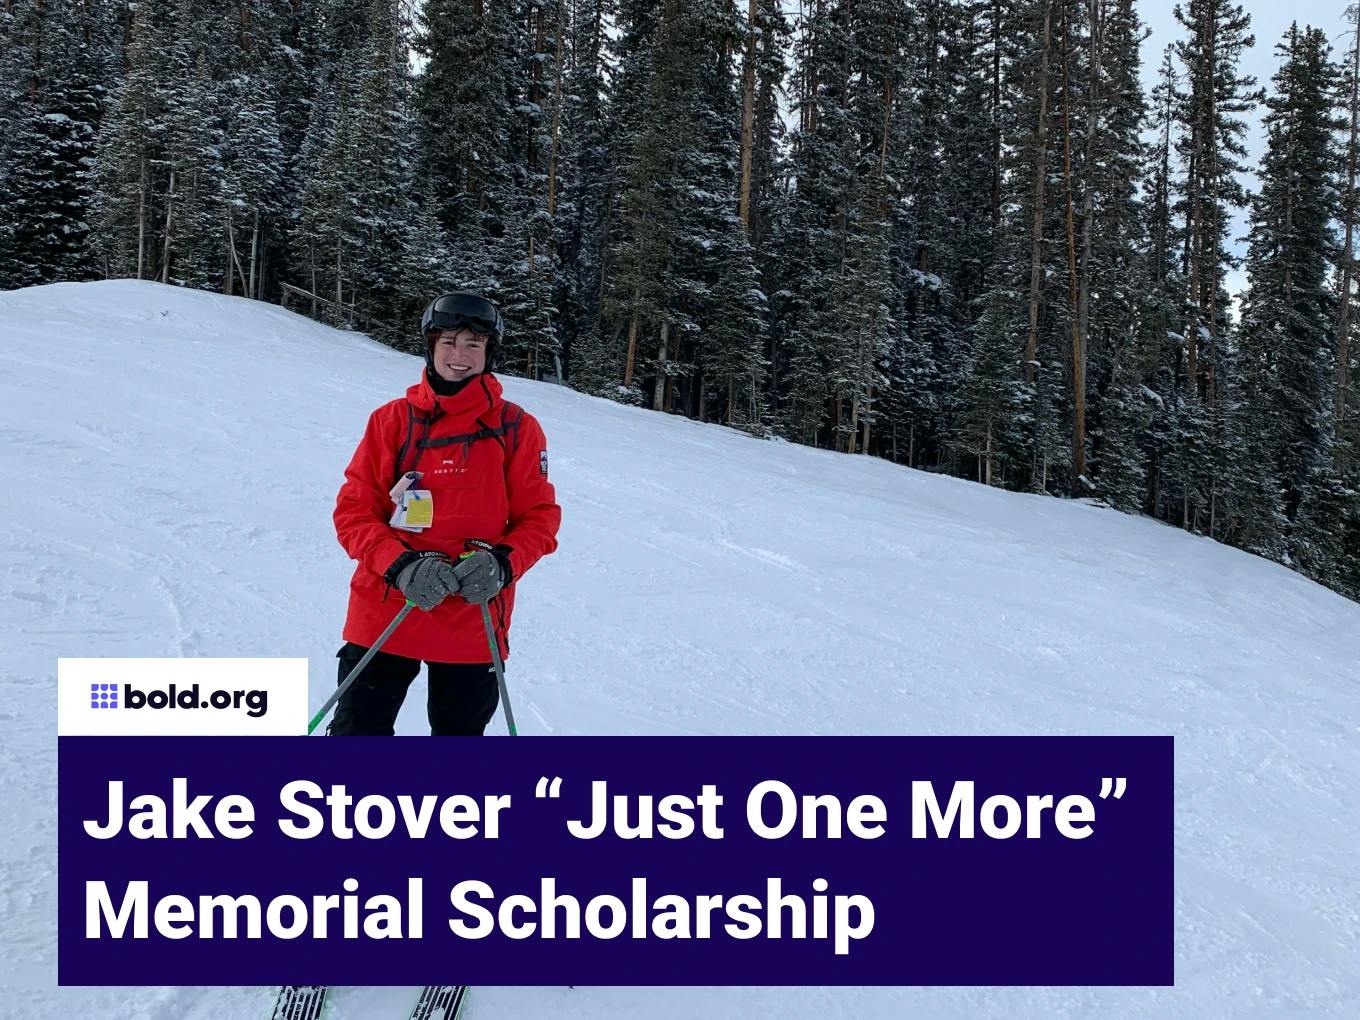 Jake Stover "Just One More" Memorial Scholarship